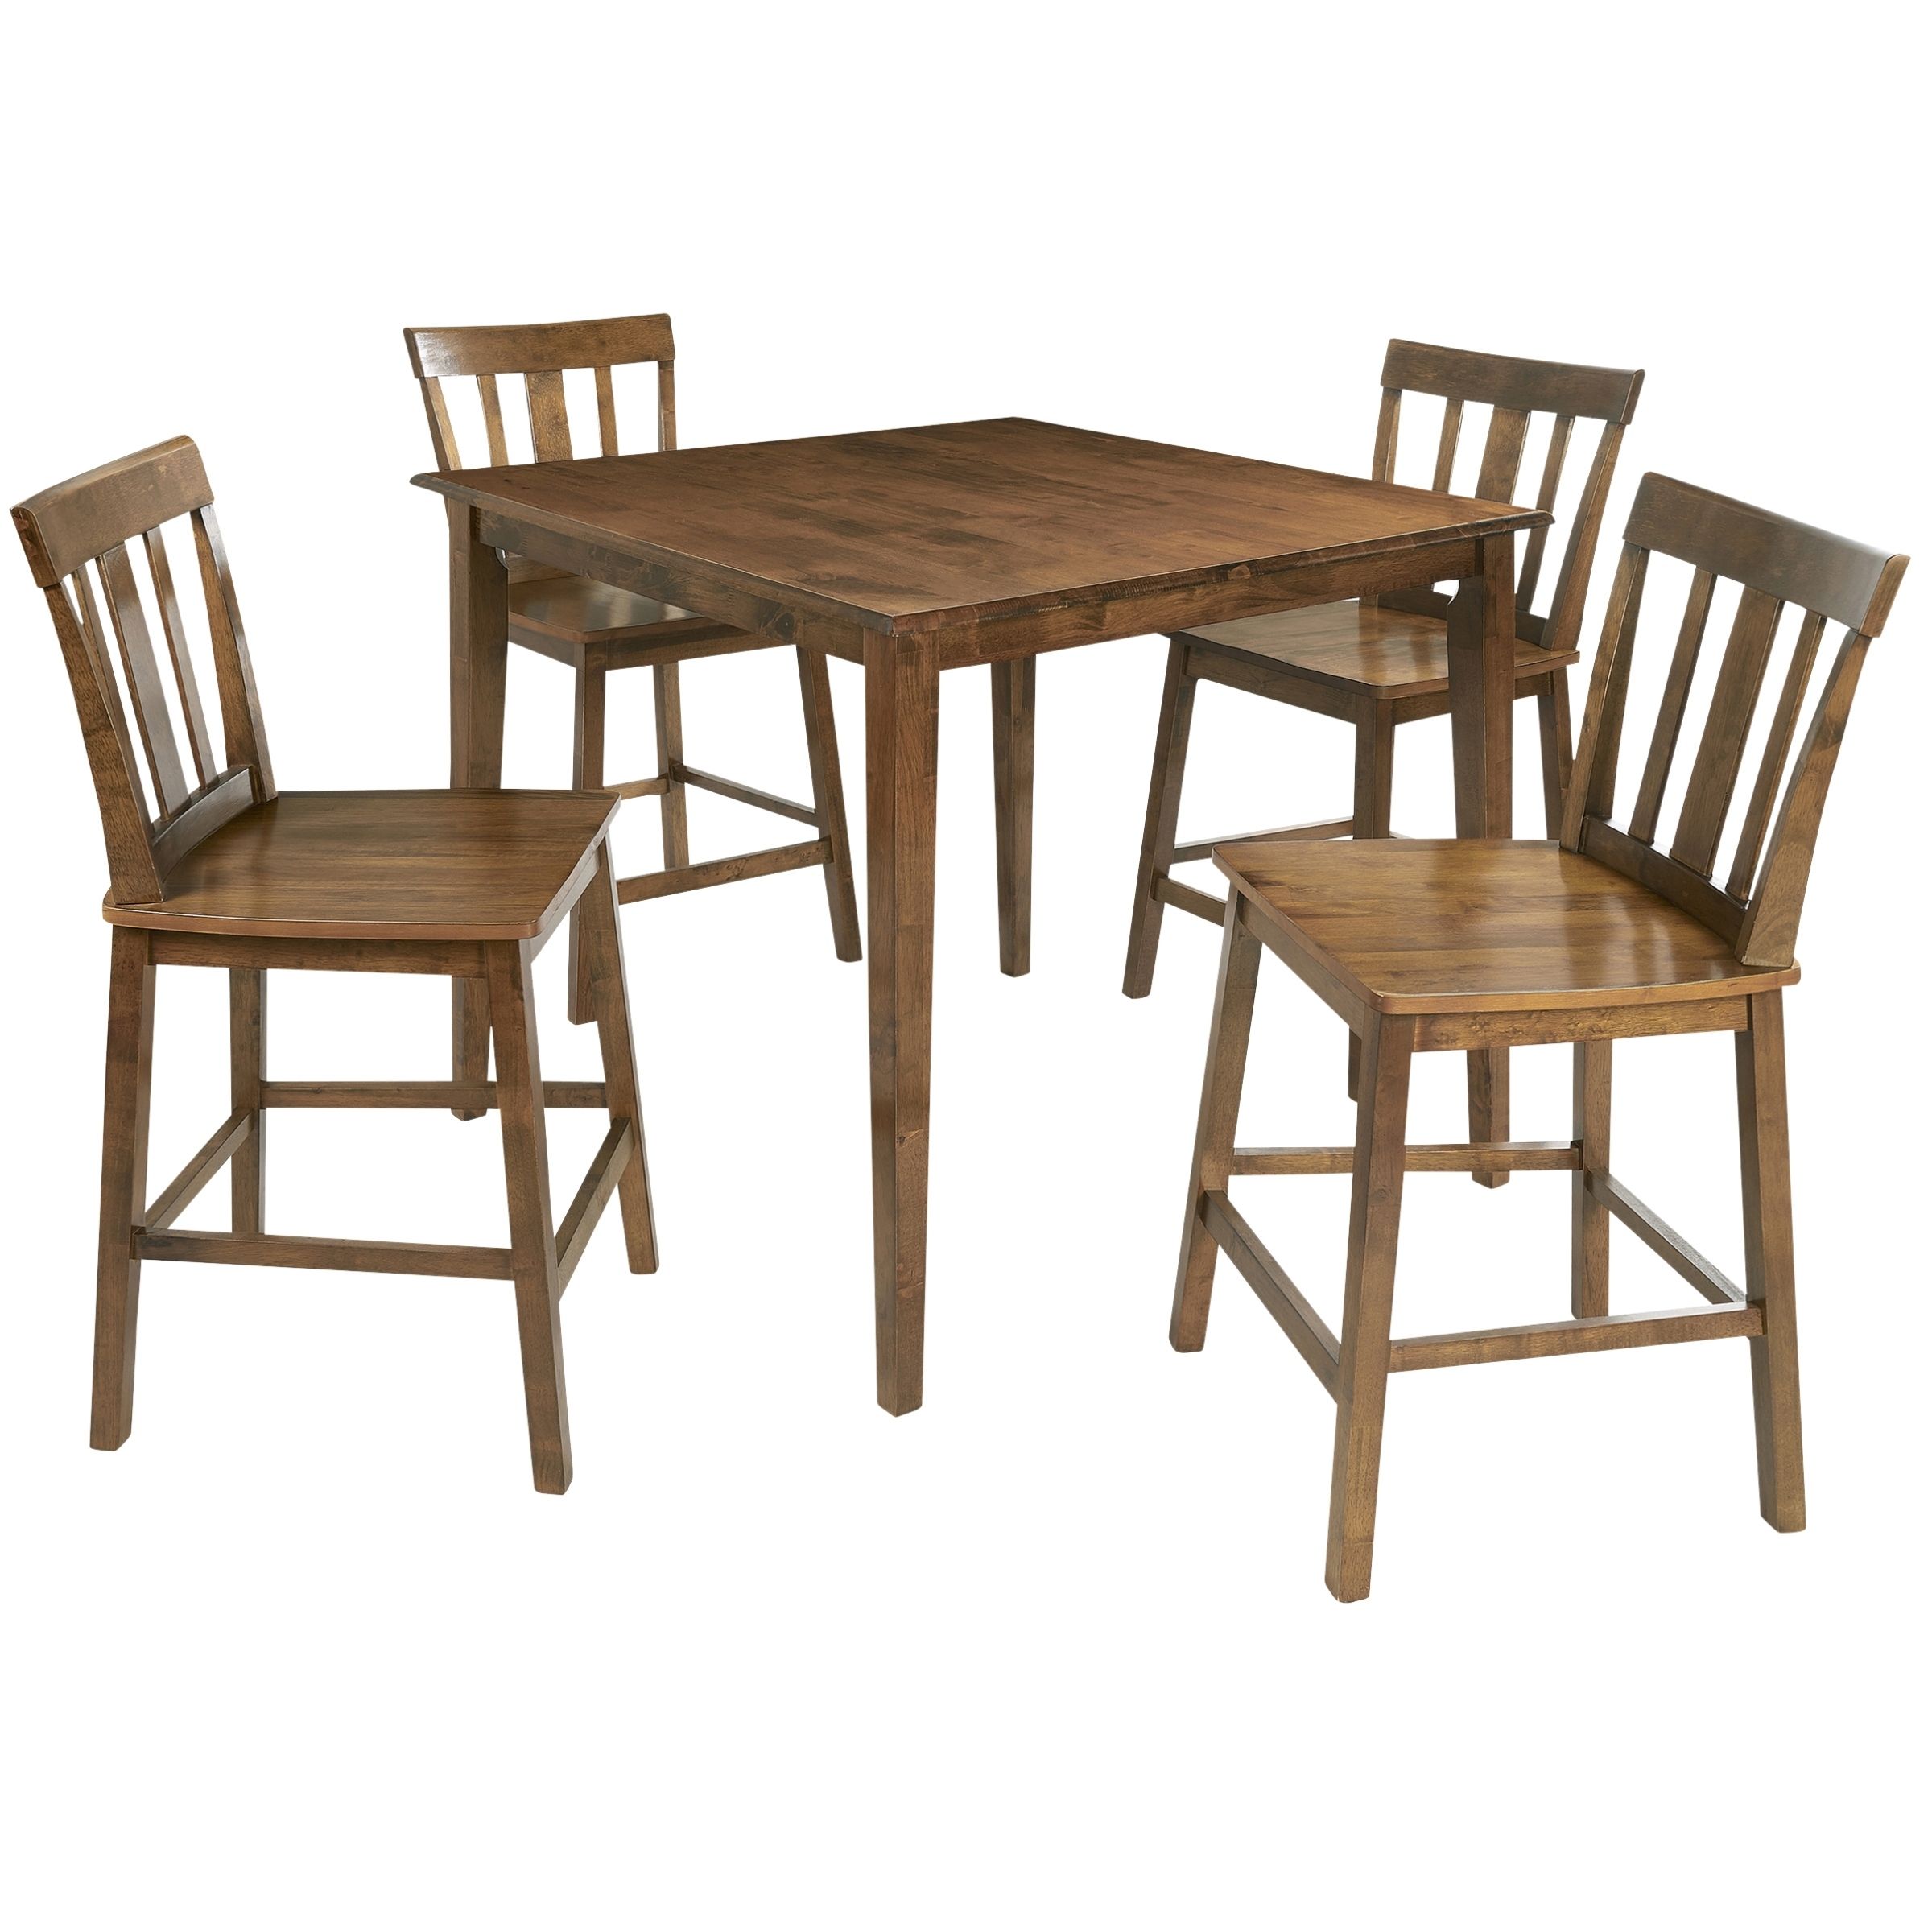 Mainstays 5 Piece Mission Counter Height Dining Set – Walmart Regarding Most Popular Pierce 5 Piece Counter Sets (View 20 of 20)